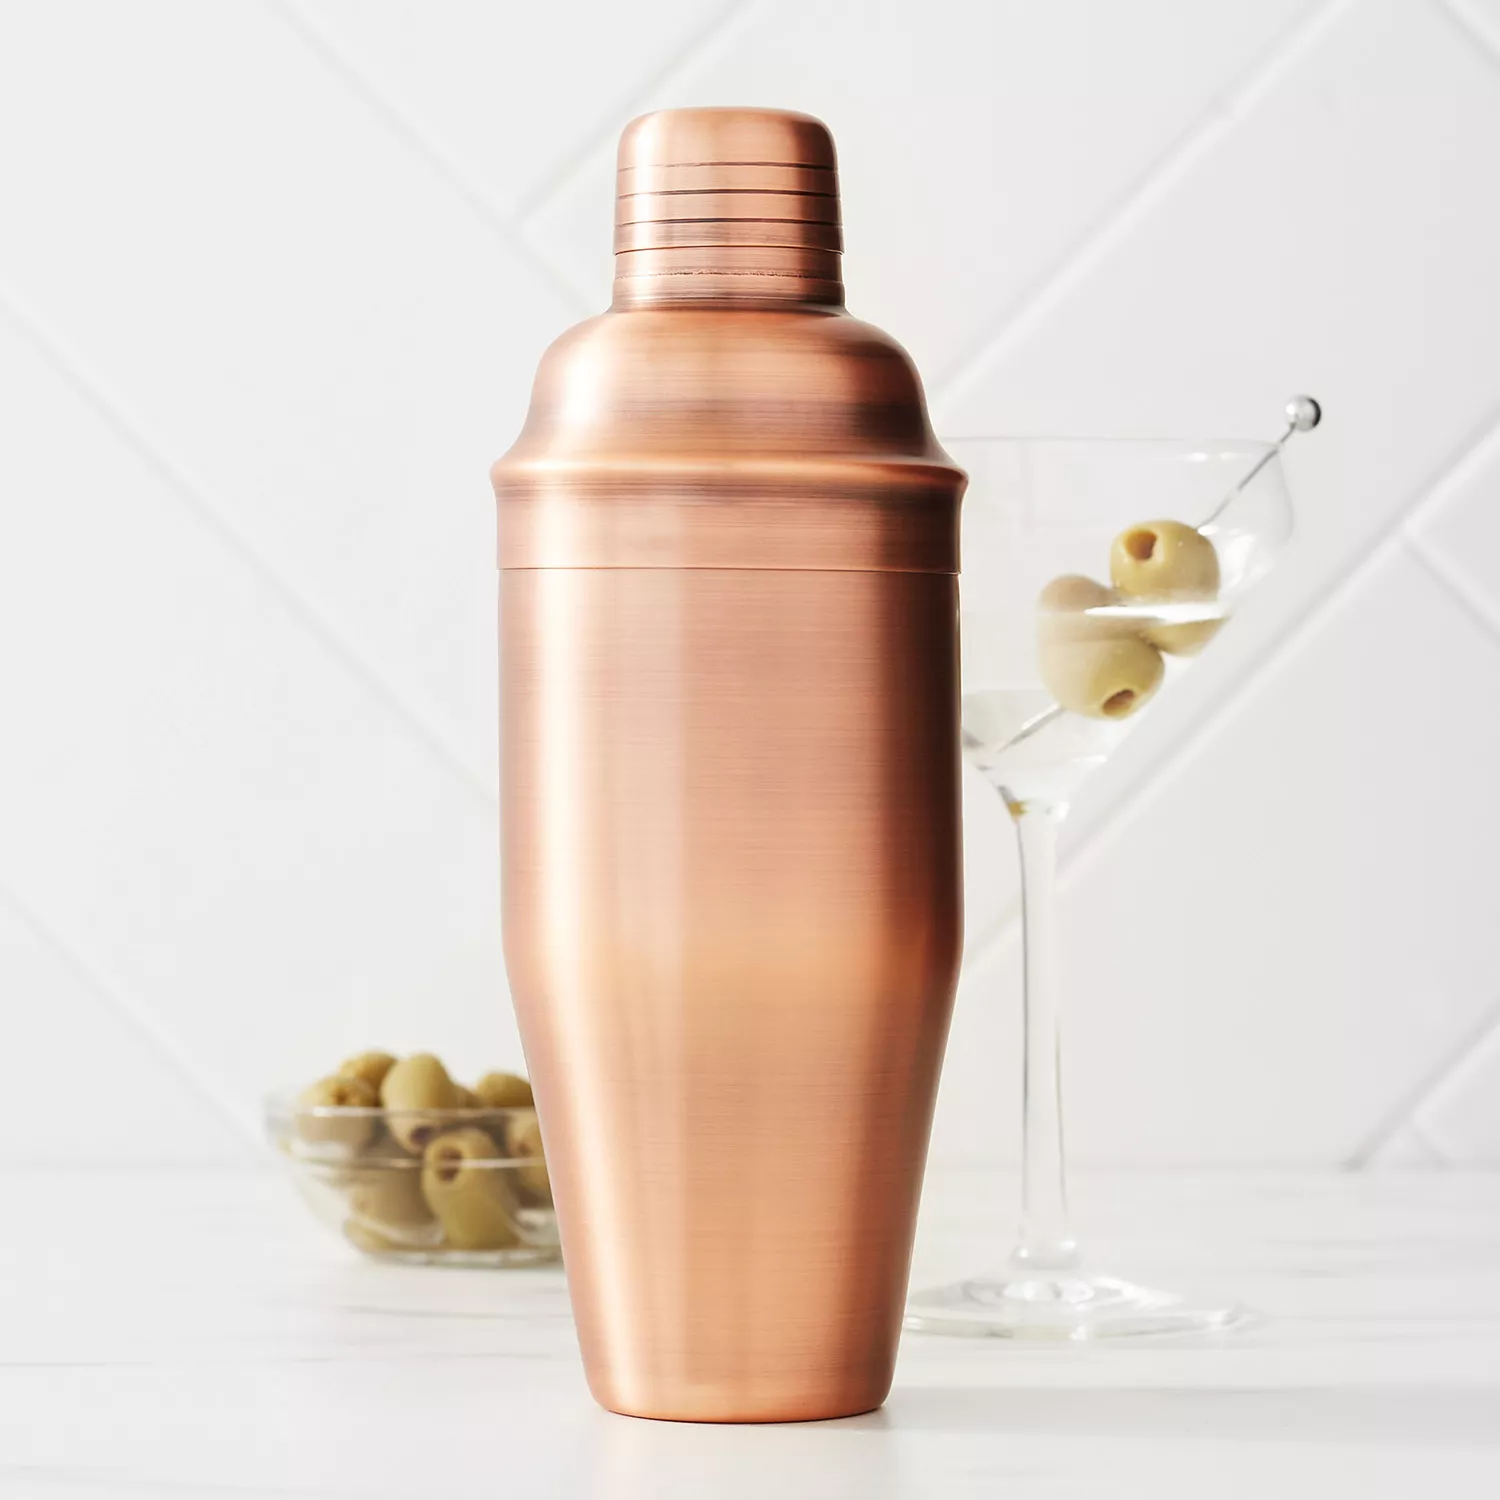 Copper Iced Tea Cup, Bar Shaker Cups